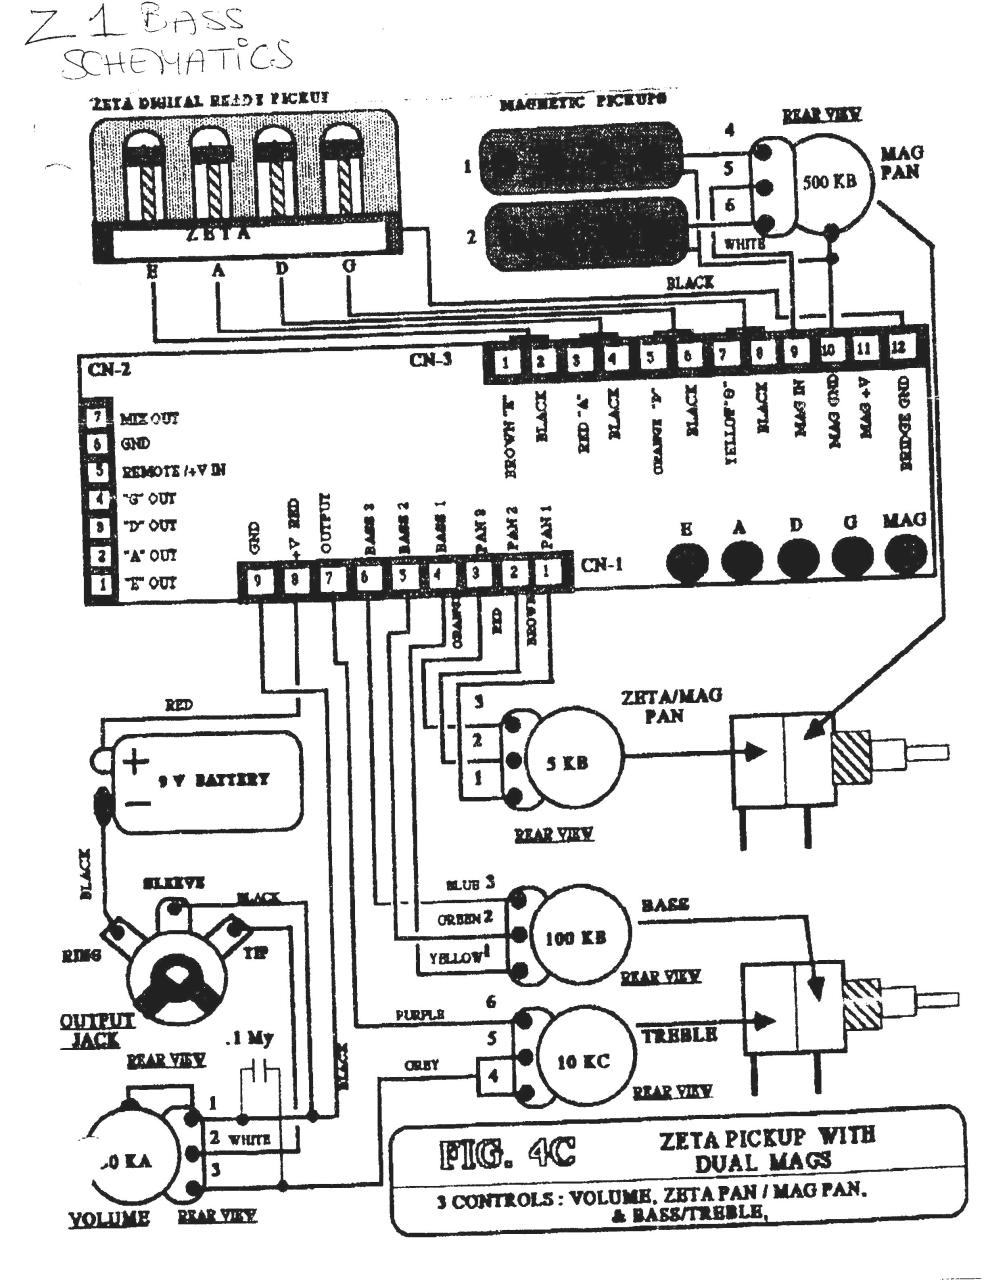 Car Stereo To Amplifier Wiring Diagram